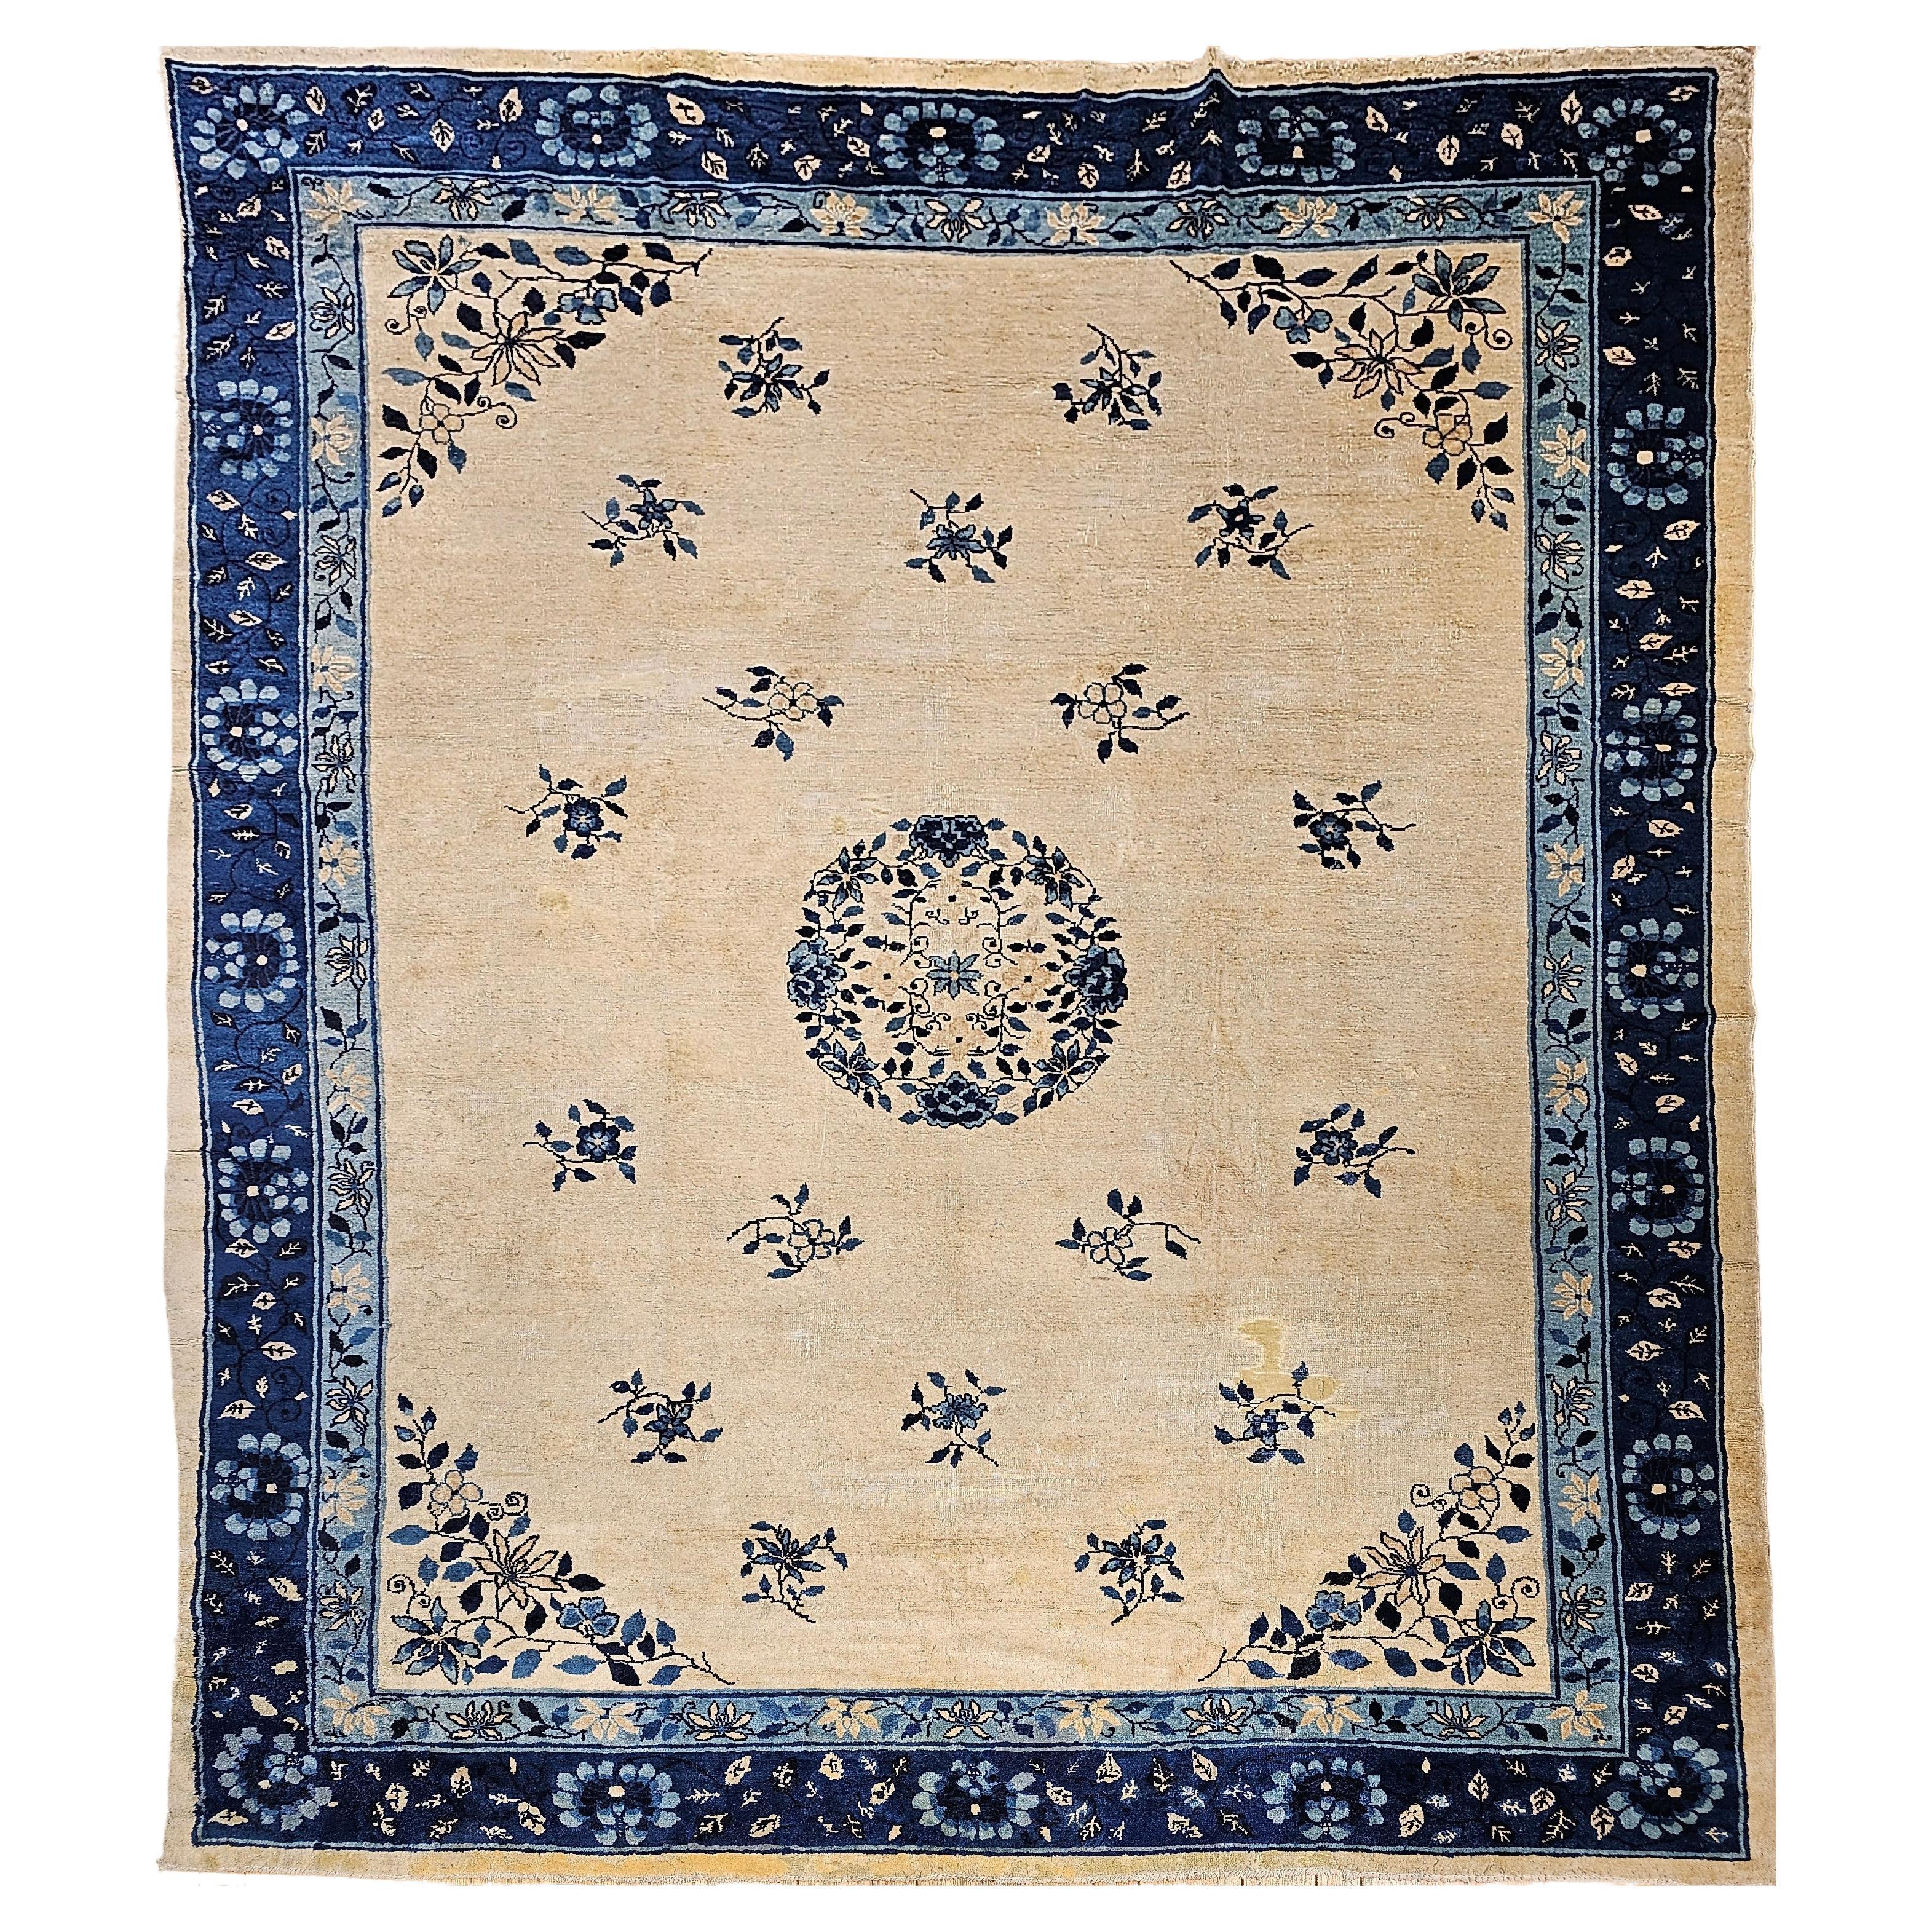 19th Century Room Size Chinese Peking Rug in Ivory, Navy, Baby Blue